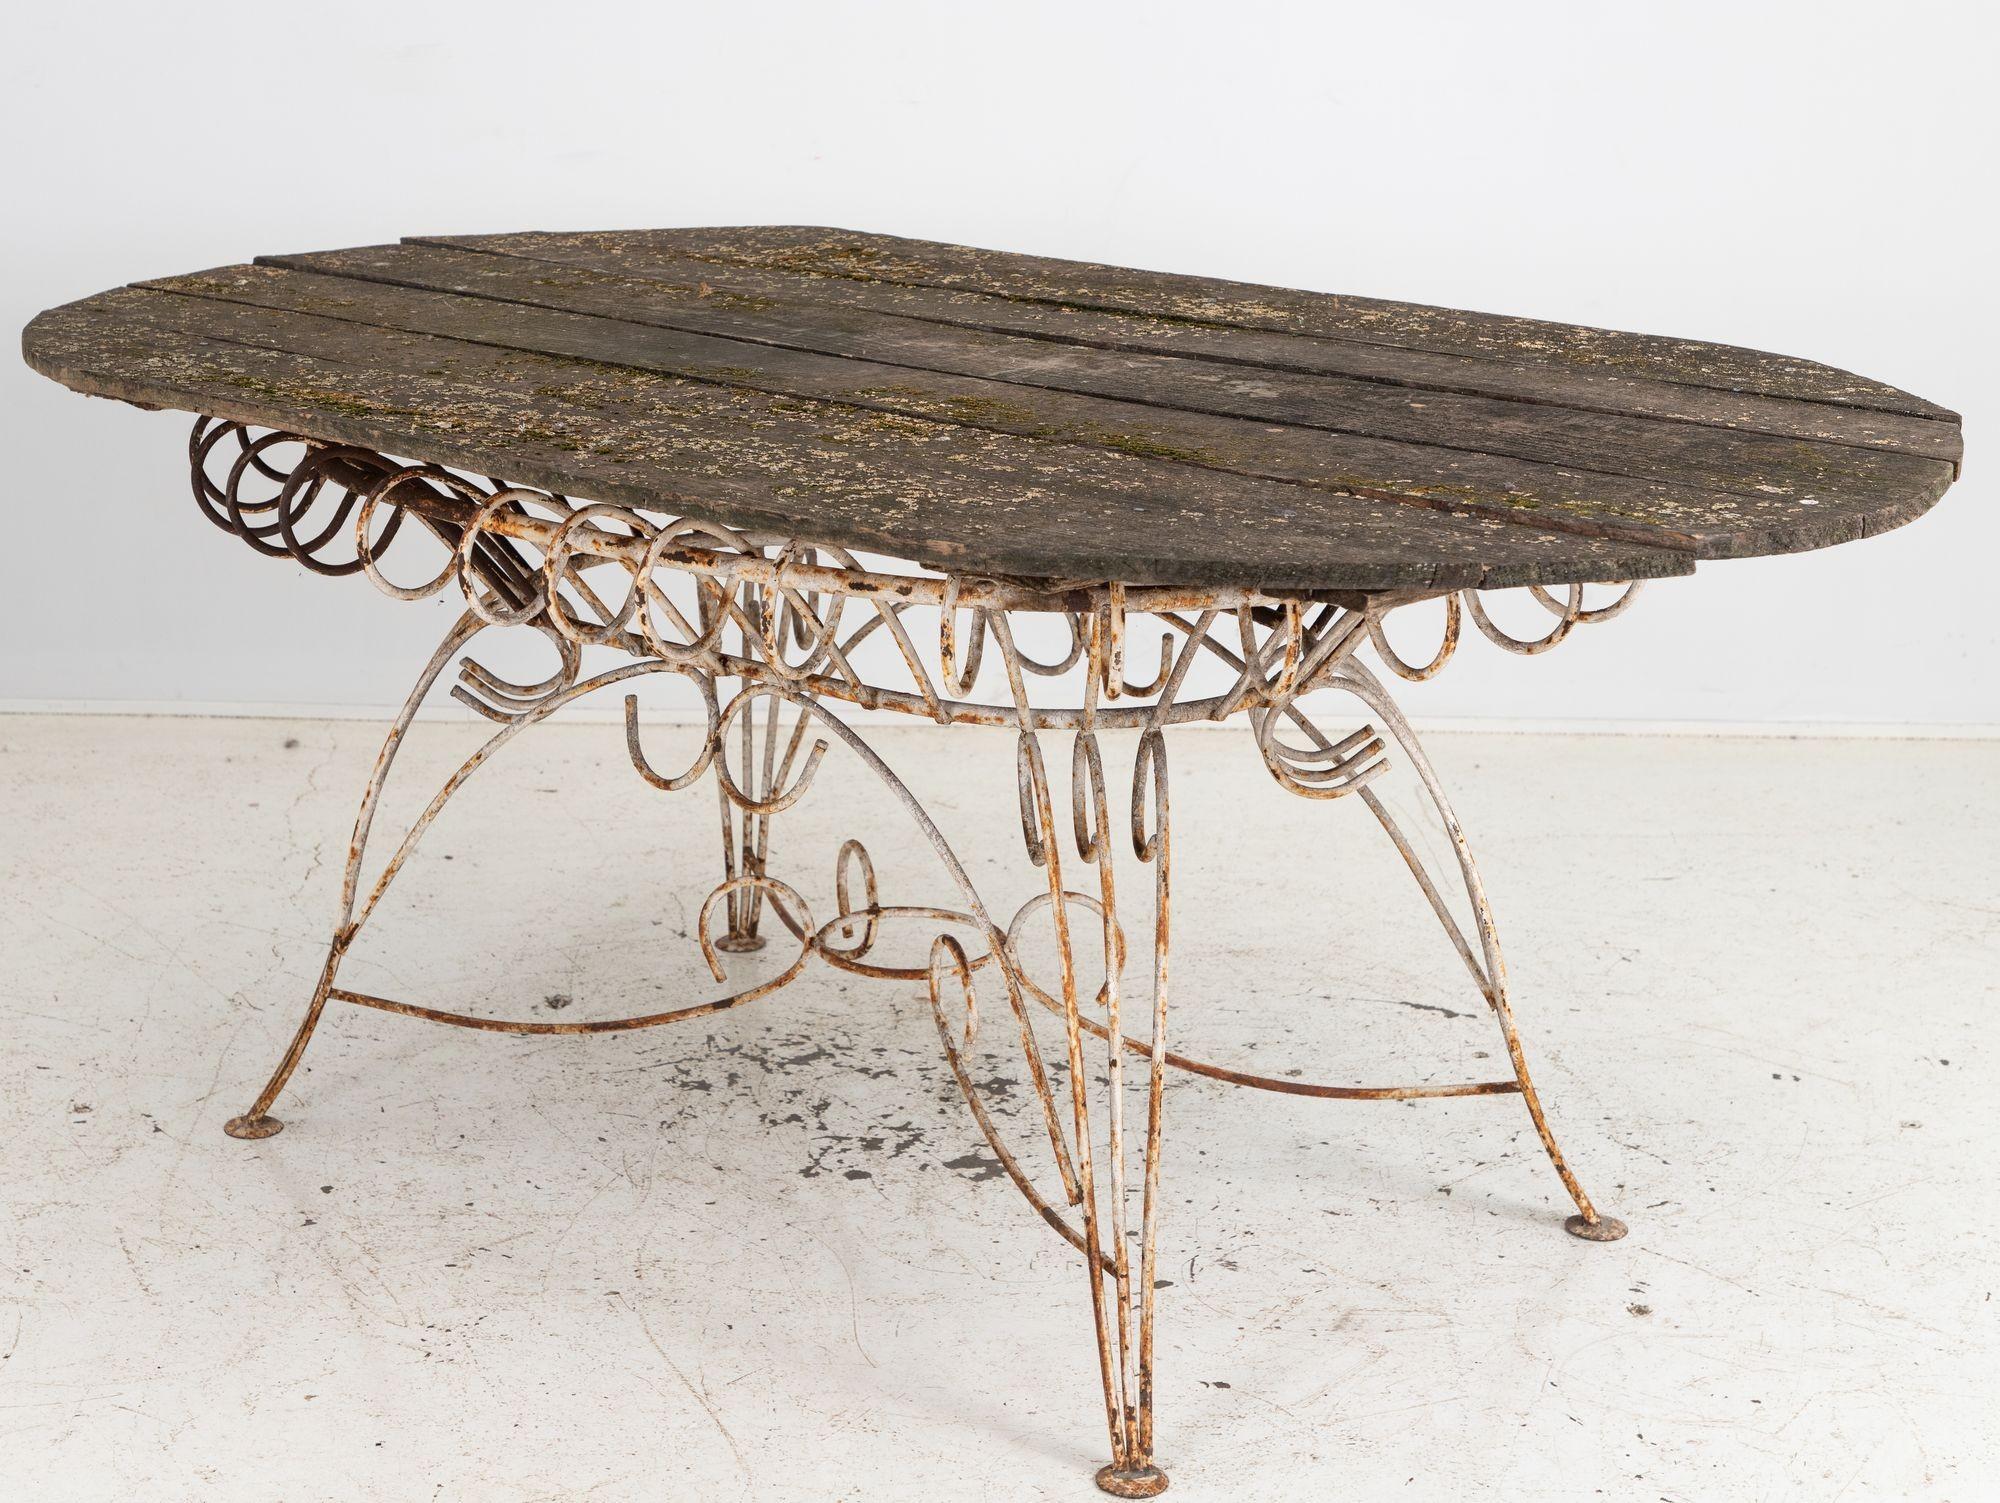 20th Century White Iron and Wood Topped Garden Dining Table, France 1930s For Sale